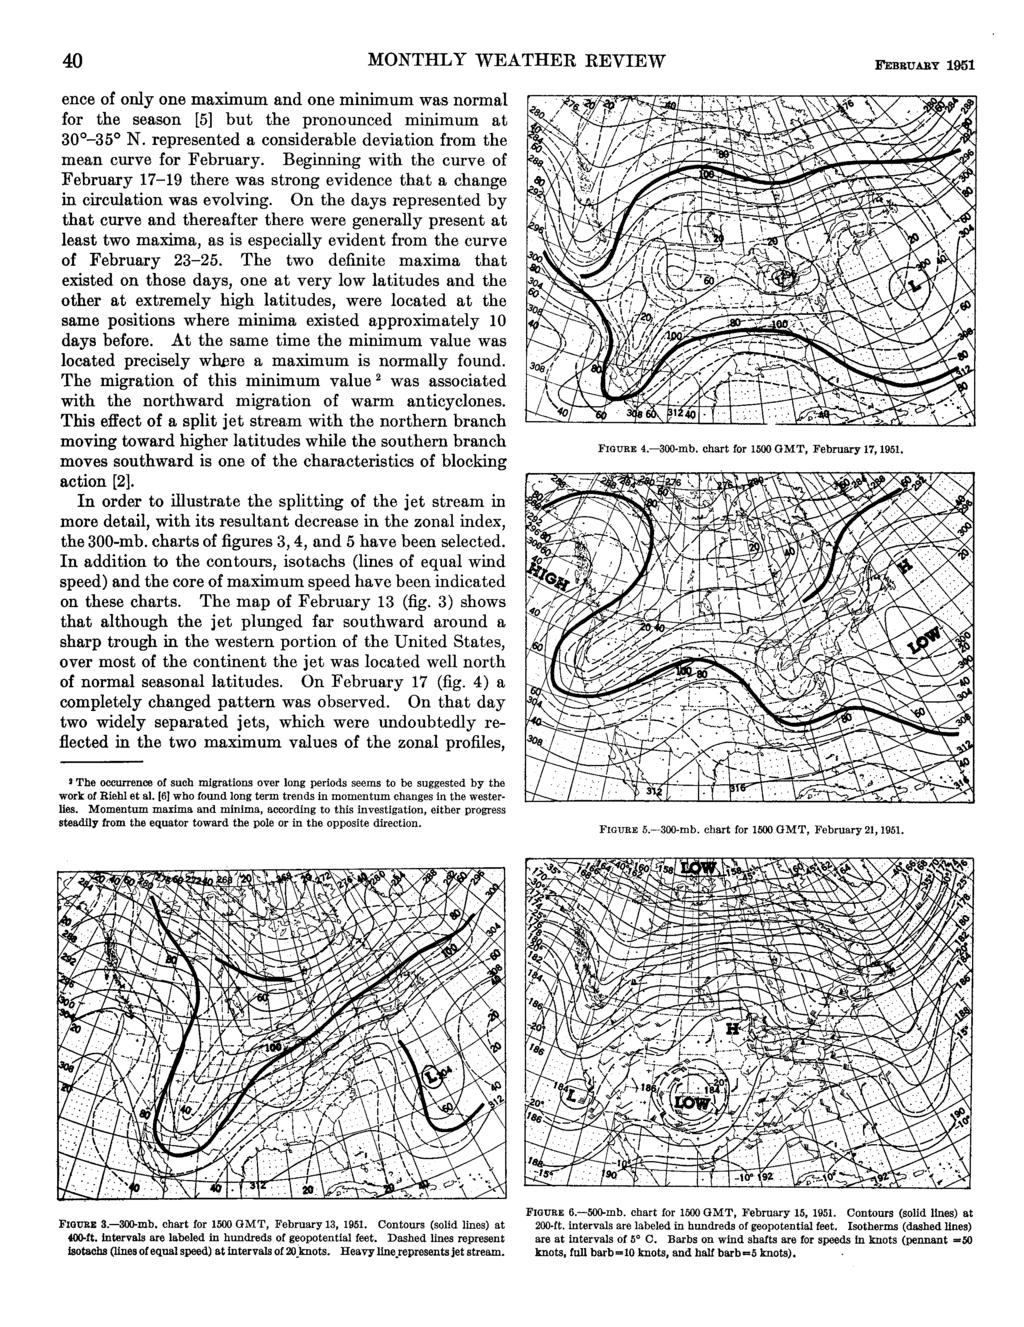 4-0 REVIEW WEATHER MONTHLY FEBBUABY 1951 ence of only one maximum and one minimum was normal for the season [5] buthe pronounced minimum at 30-350 N.